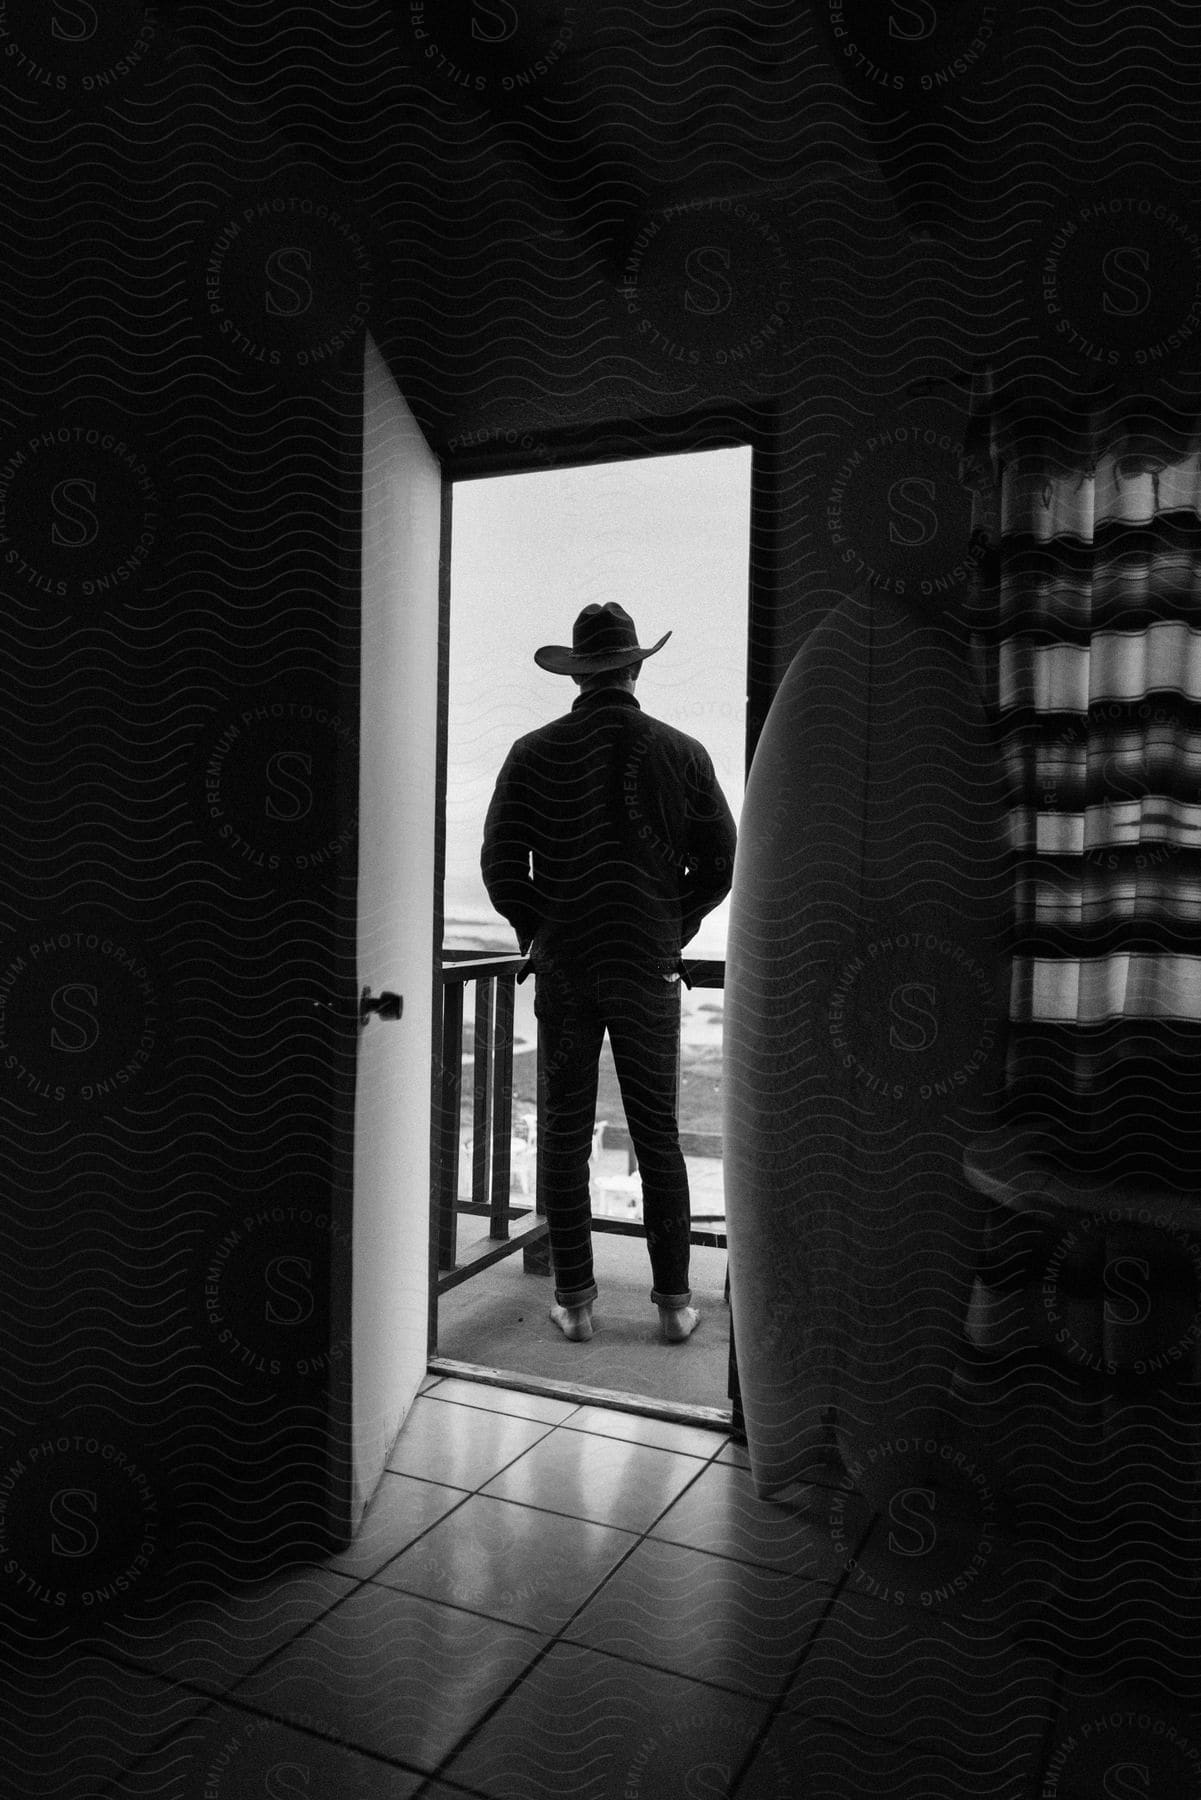 A rugged man, donned in a jacket and a worn cowboy hat, stands tall on the wooden porch, surveying the horizon